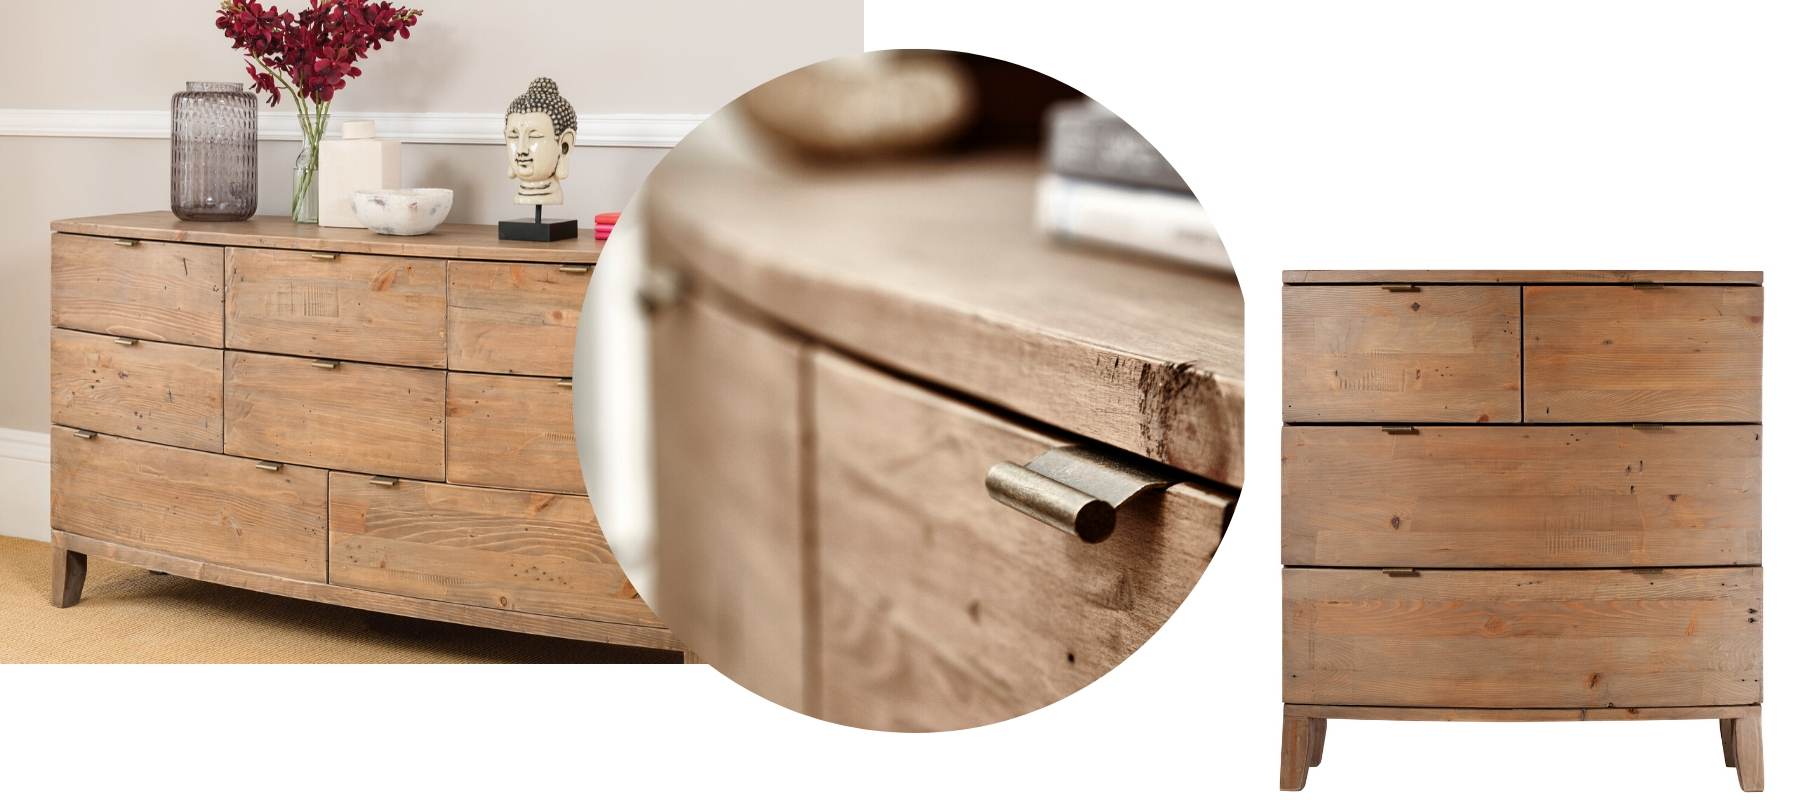 Large wooden chest of drawers, close up of reclaimed wood and medium chest of drawers